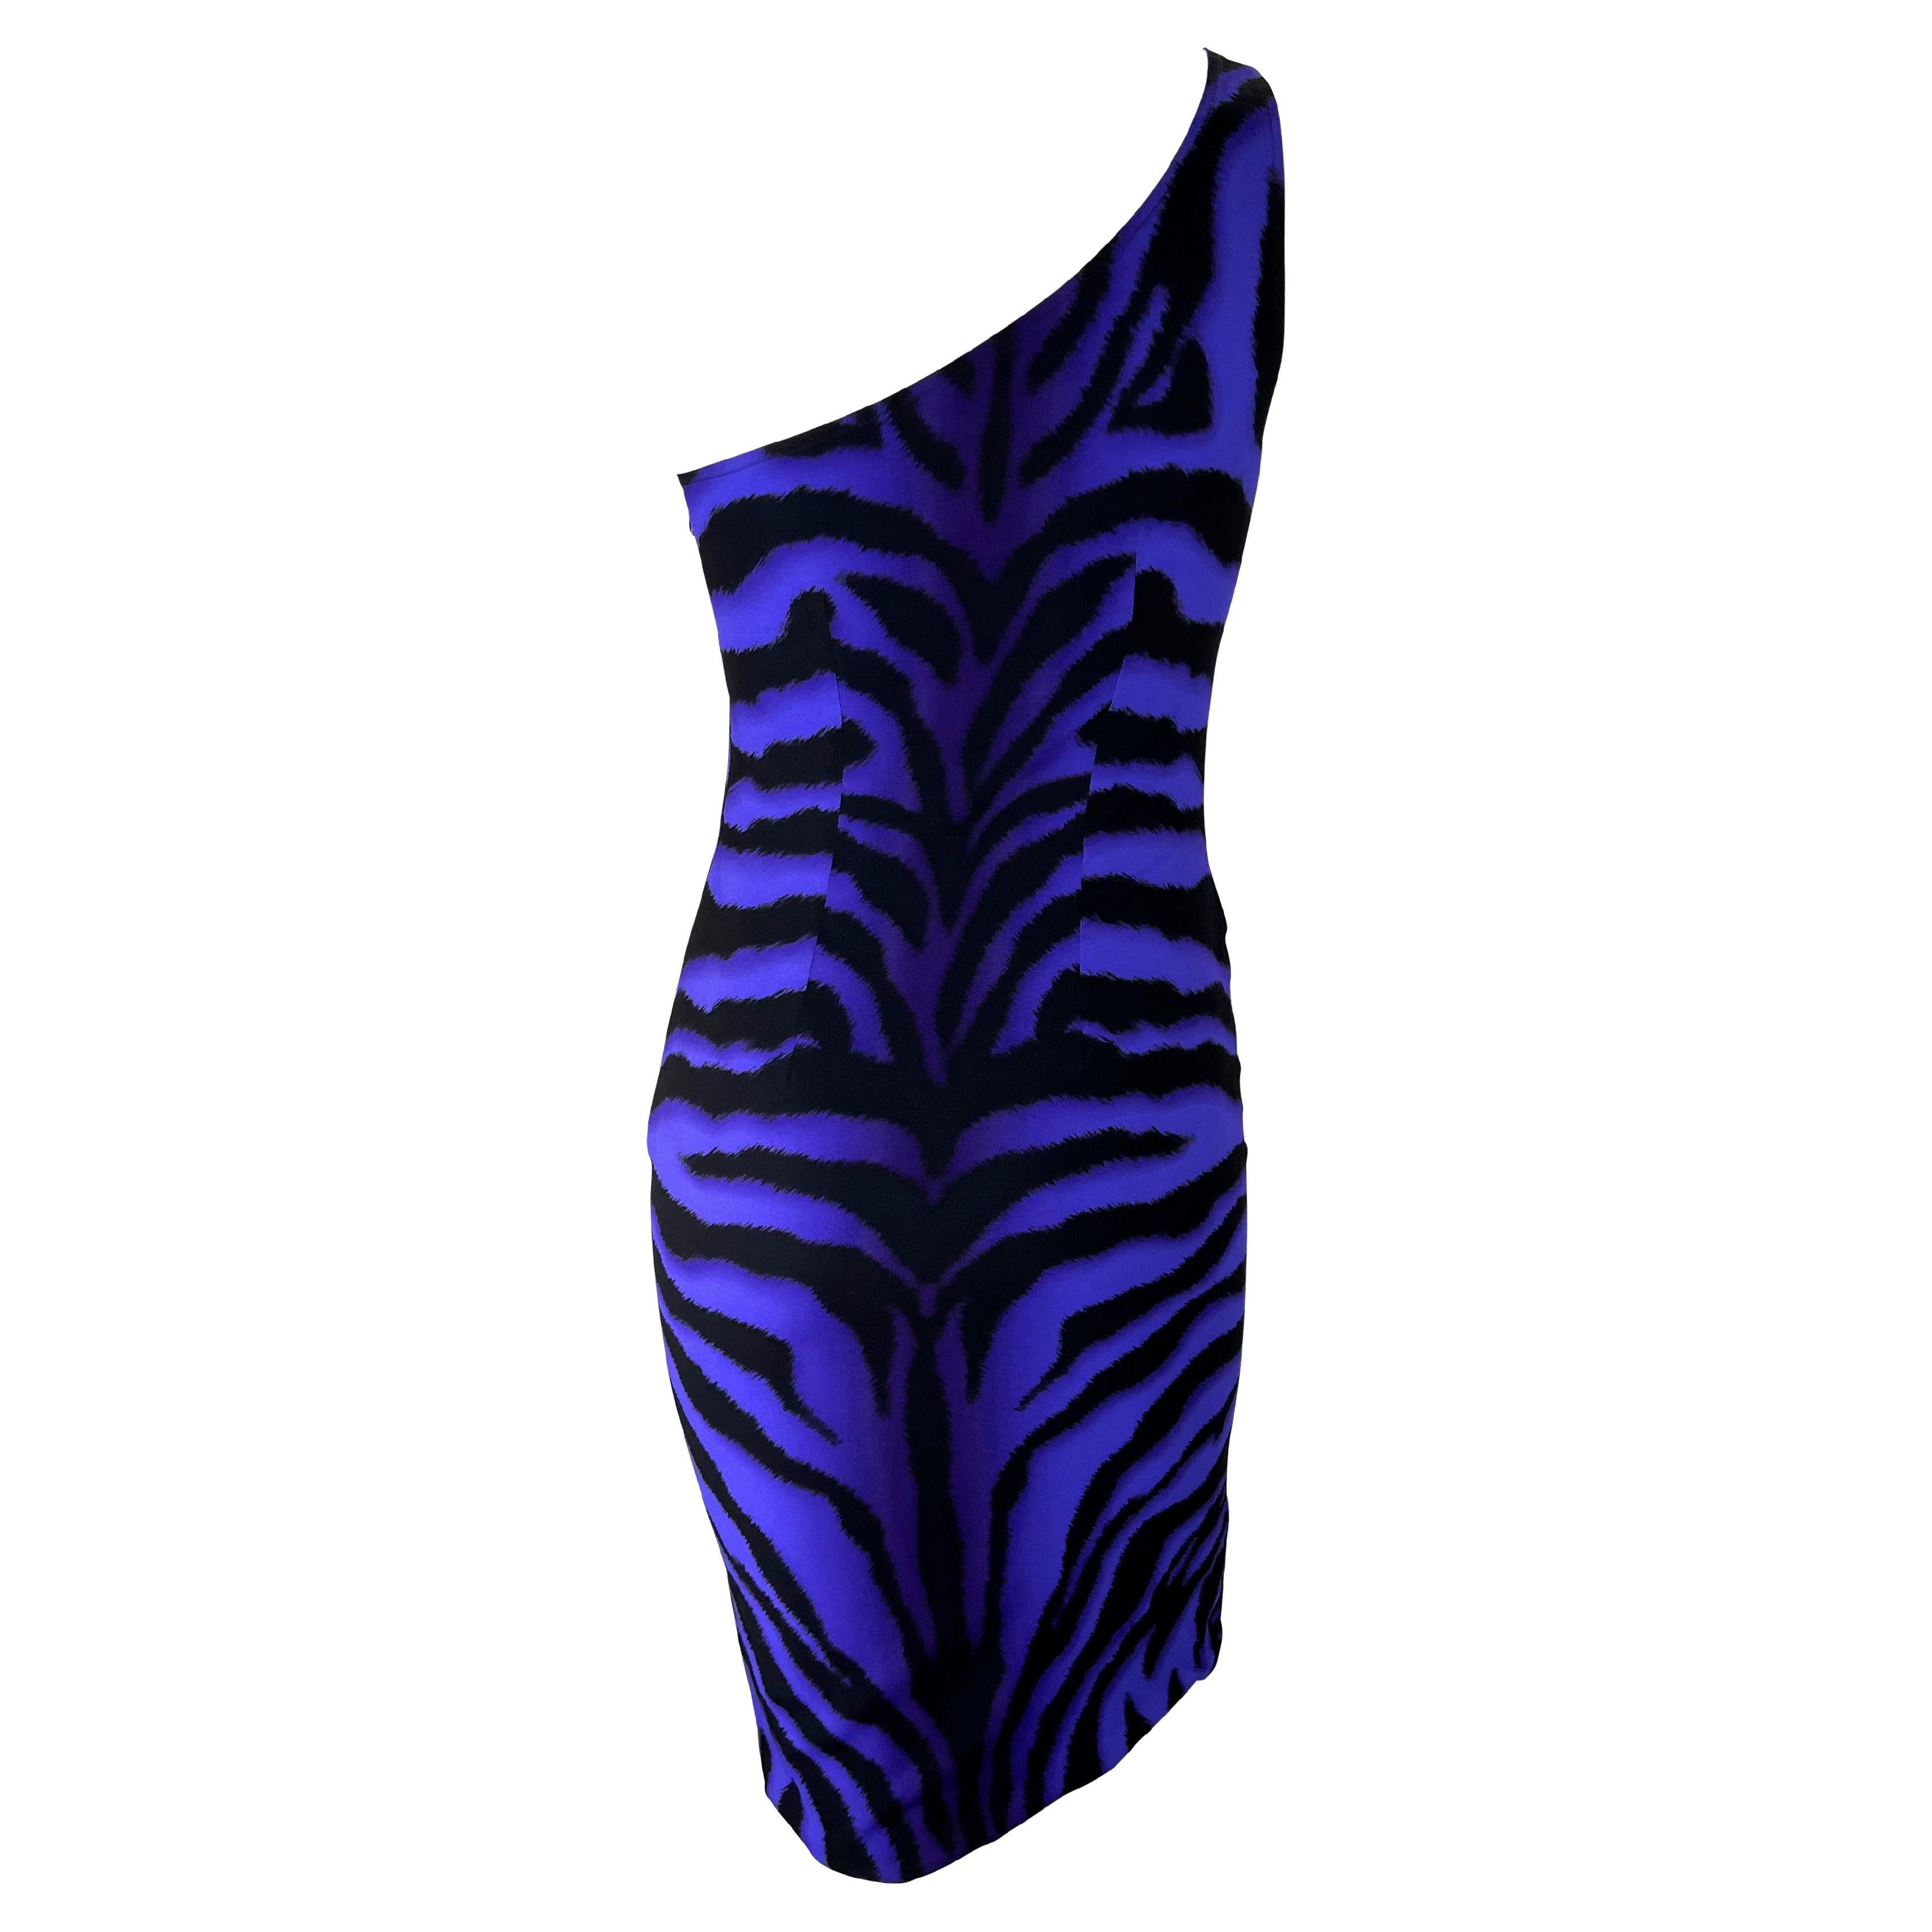 F/W 2004 Versace by Donatella Versace Purple Tiger One Shoulder Buckle Dress  In Good Condition For Sale In West Hollywood, CA